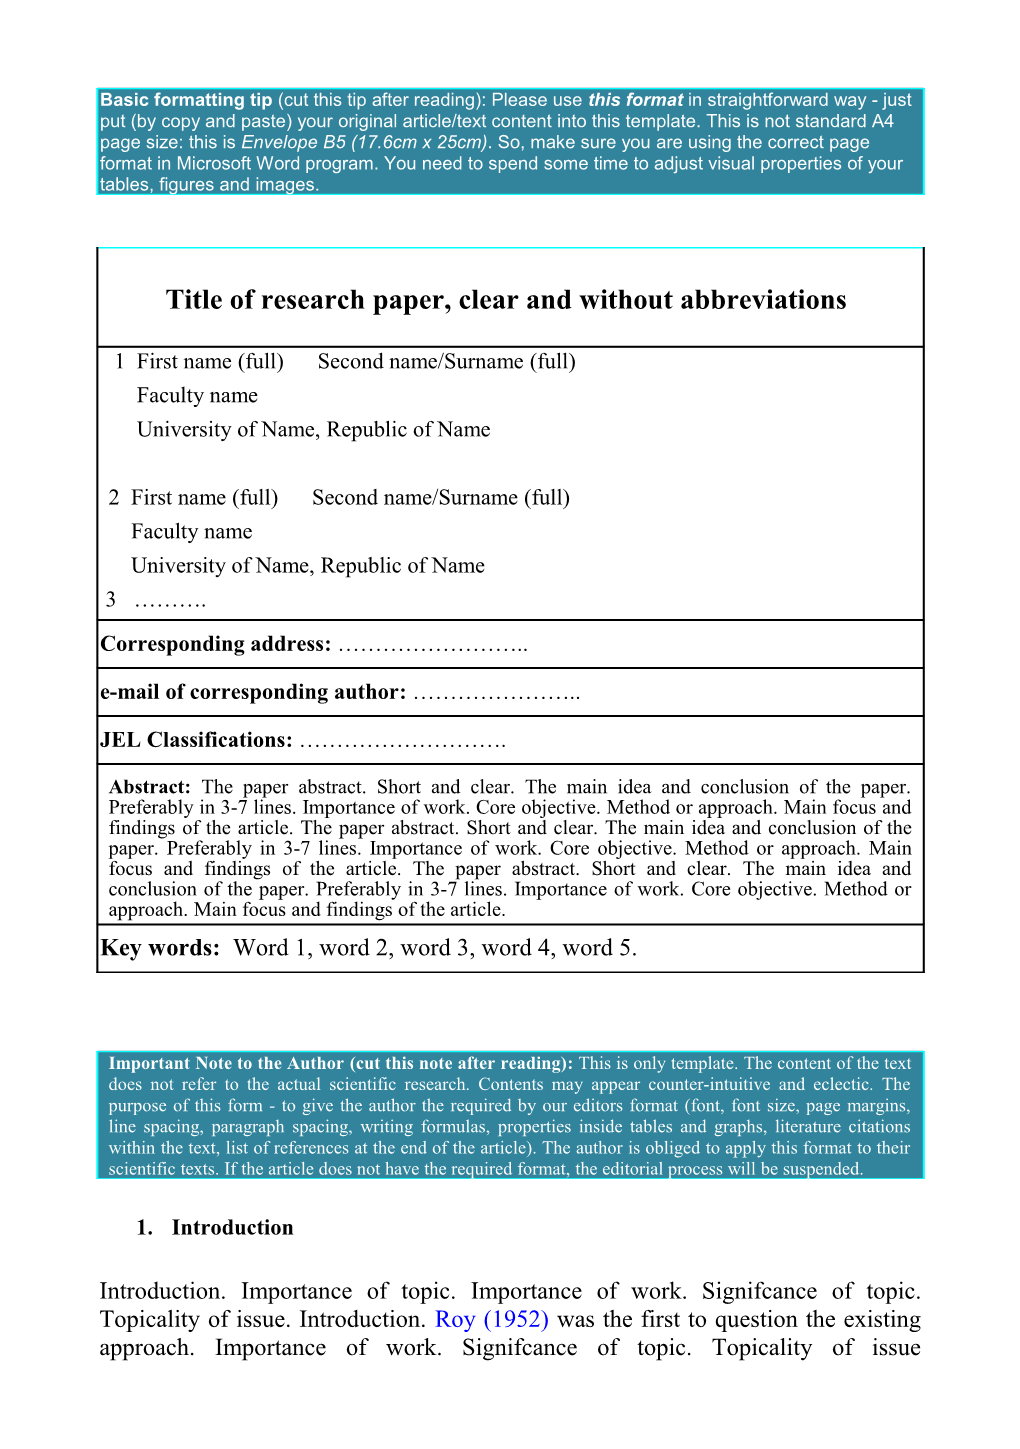 Title of Research Paper, Clear and Without Abbreviations